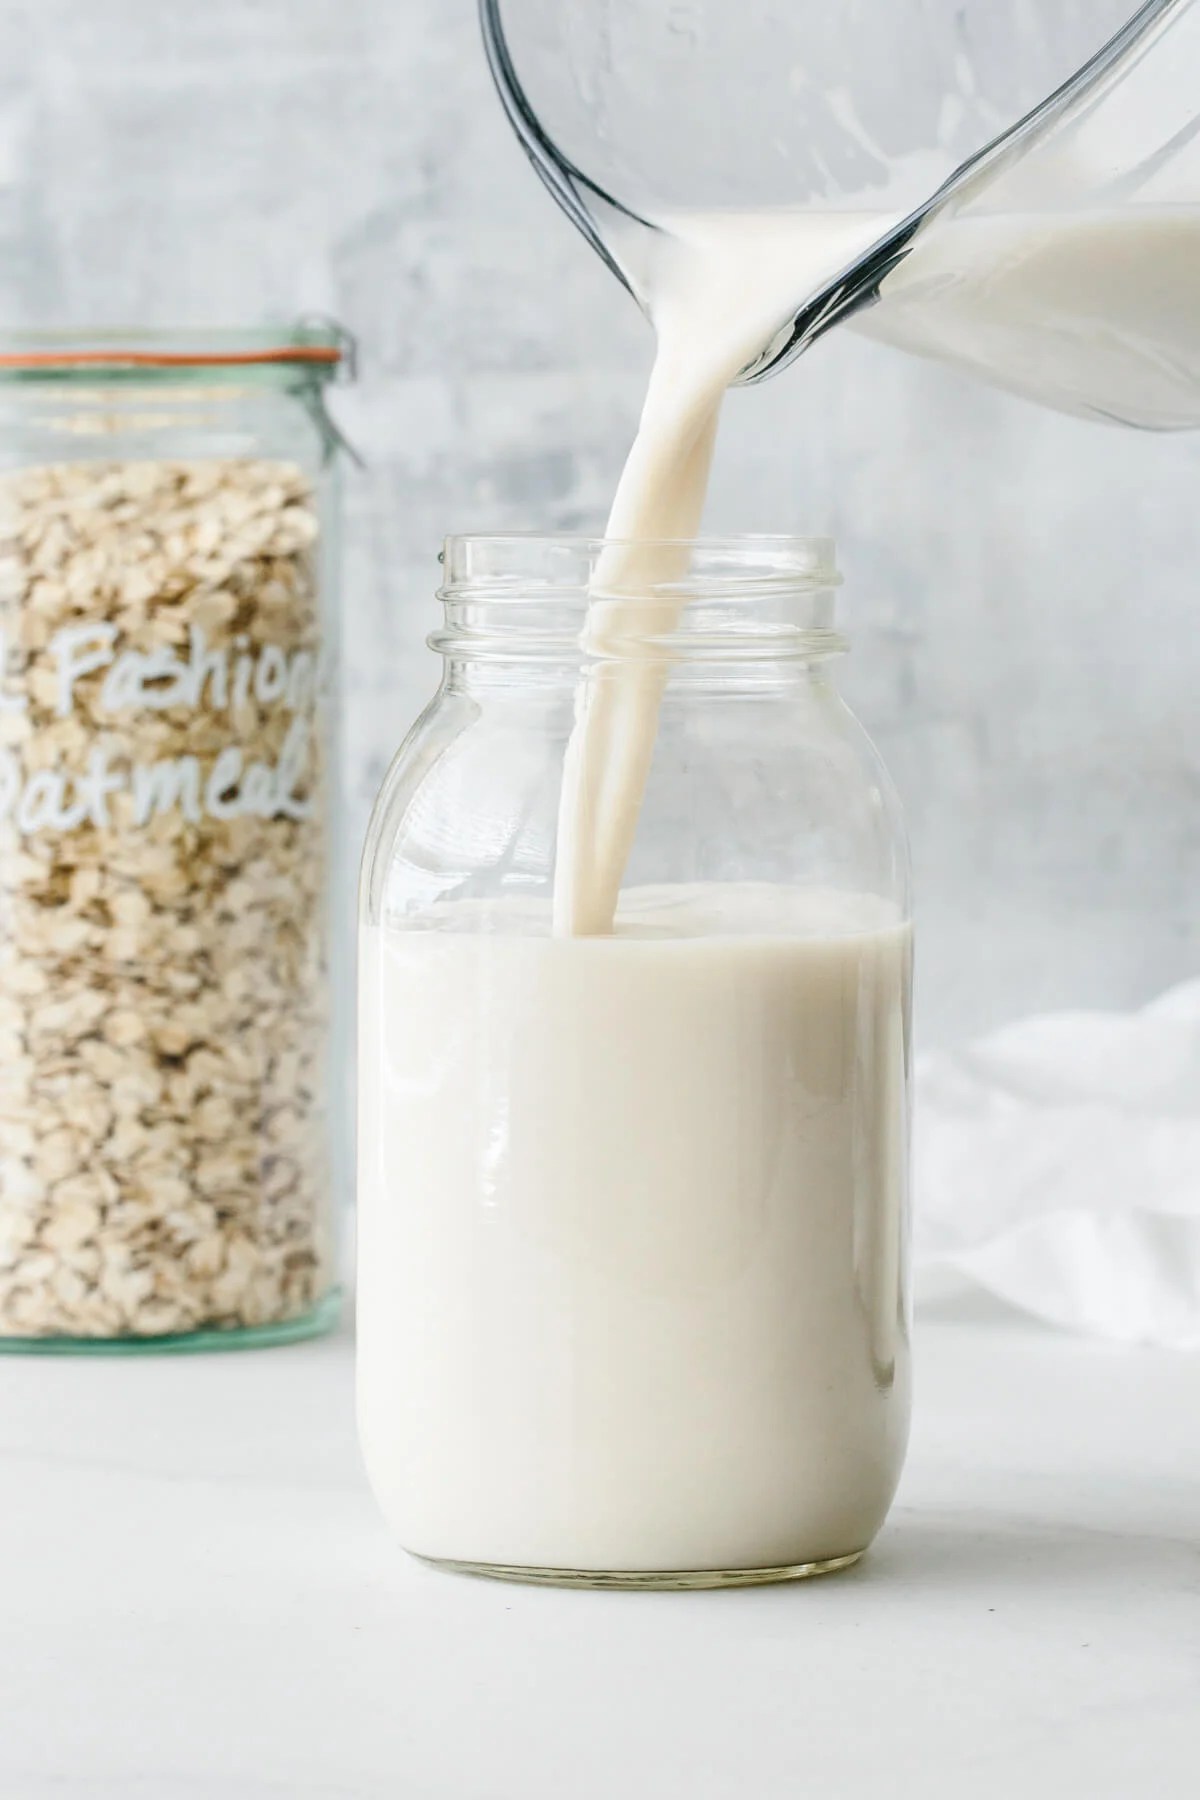 Oat milk poured into a glass container.